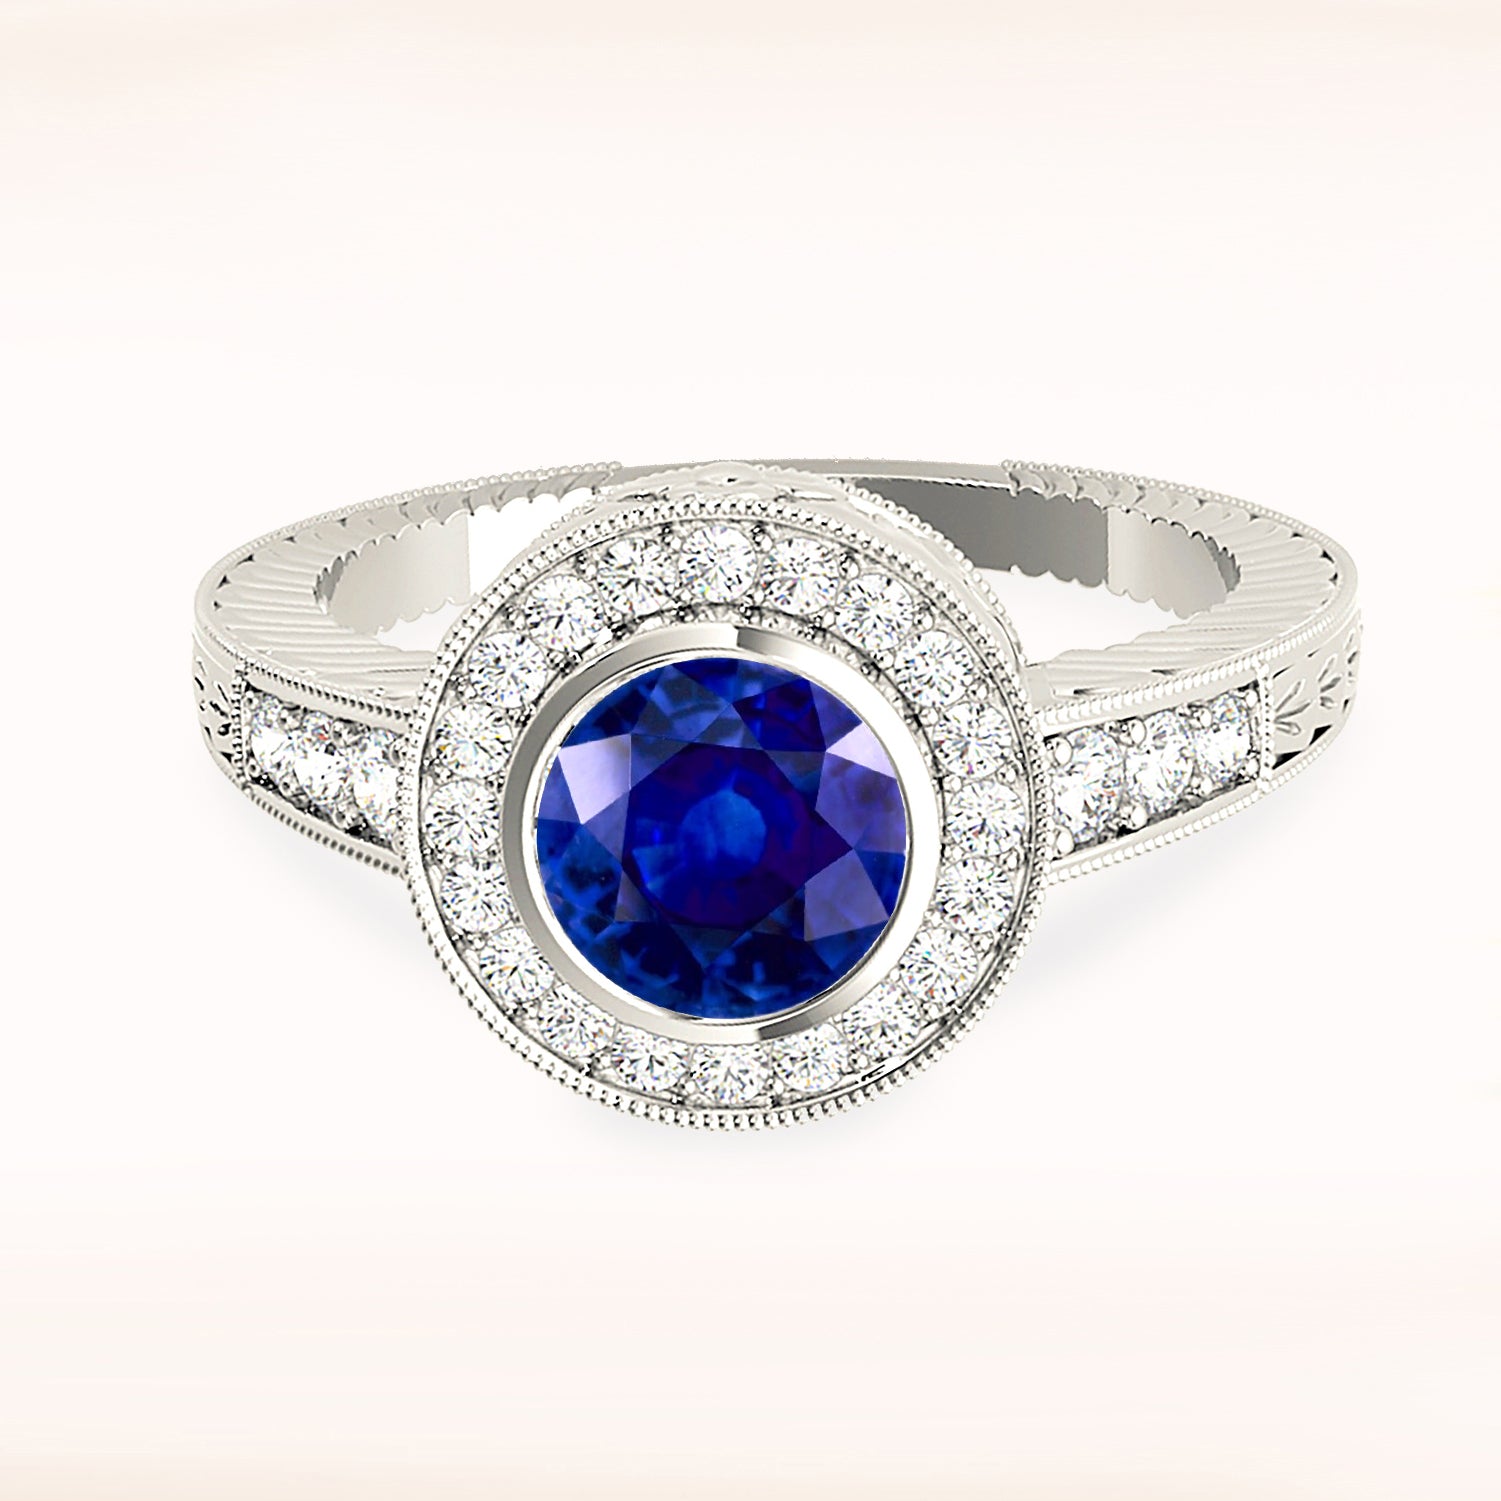 1.35 ct. Genuine Blue Sapphire Bezel Set Vintage Halo Ring with 0.34 ctw. Side Diamonds-in 14K/18K White, Yellow, Rose Gold and Platinum - Christmas Jewelry Gift -VIRABYANI